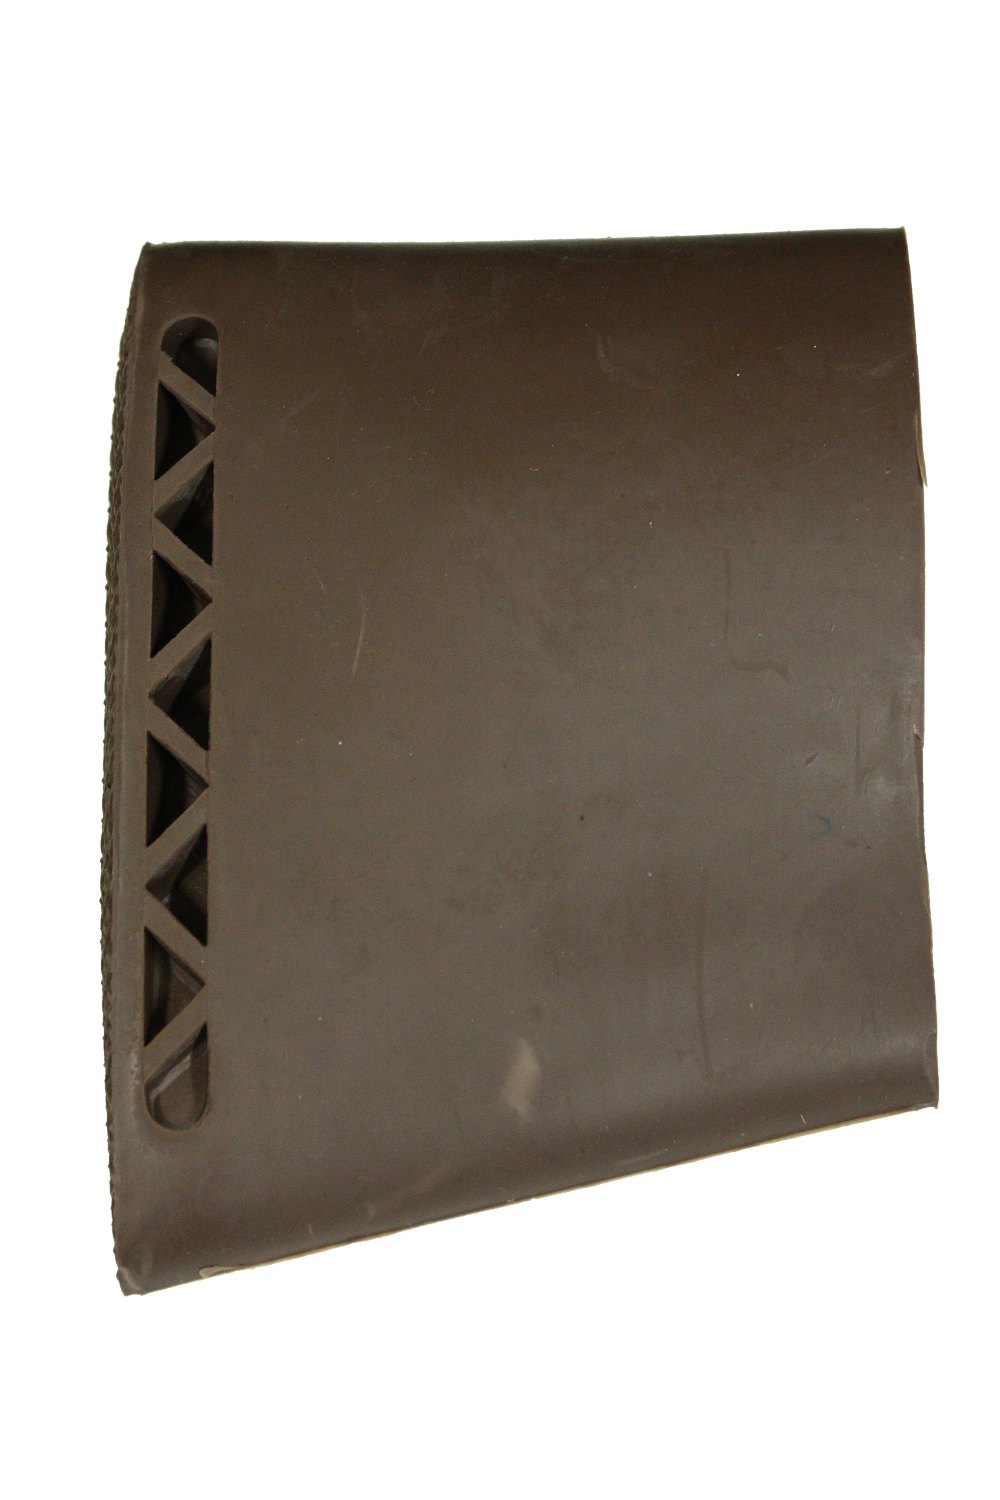 Bisley Rubber Slip-on Recoil Pads